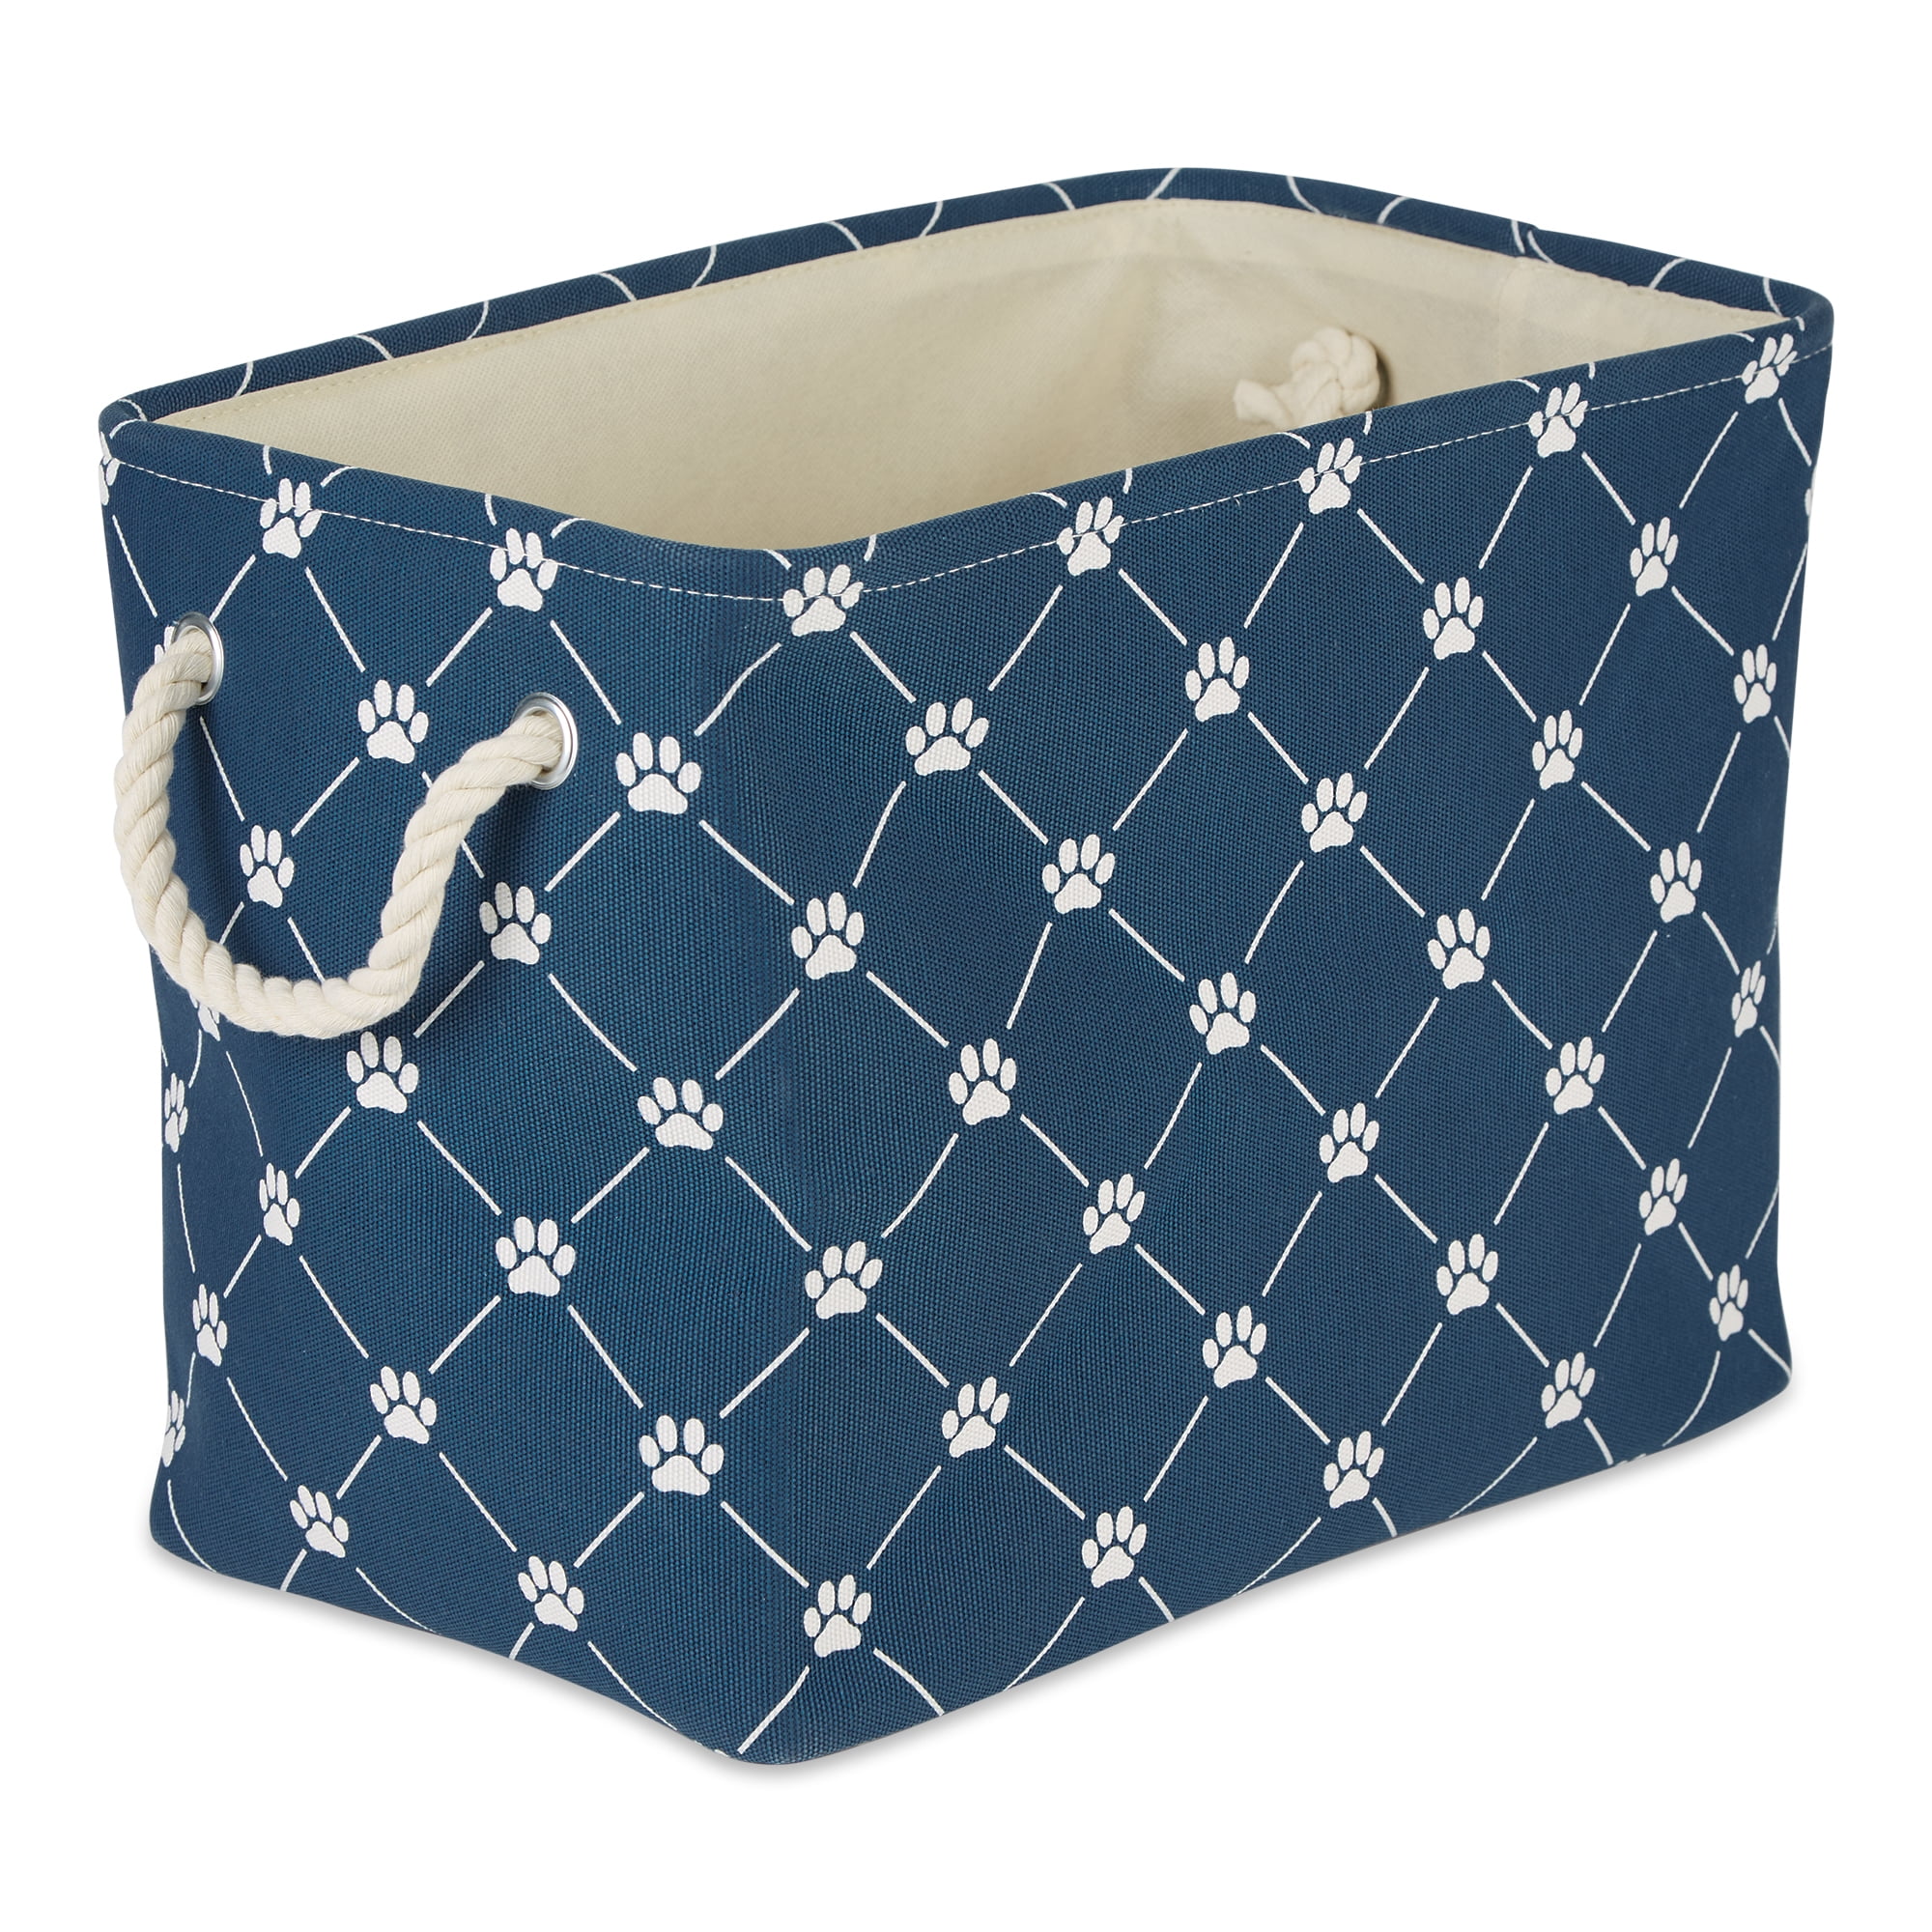 Picture of Design Imports CAMZ14229 Polyester Trellis Paw Rectangle Pet Bin, Navy